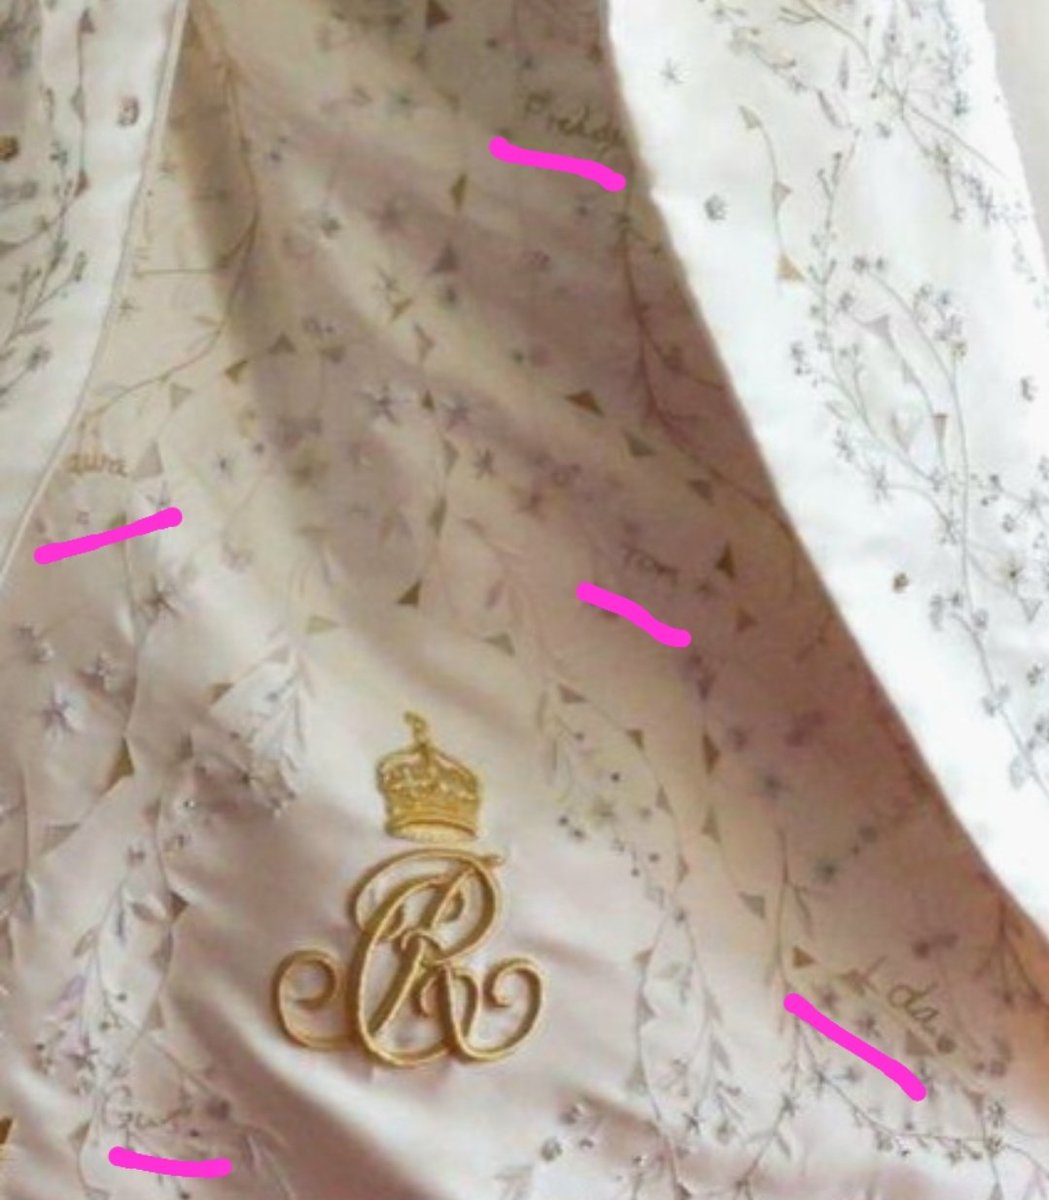 Not only the embroidered dogs on Camilla's skirt, but family names too - Gus, Freddy, Tom, Lola and Laura (it looks like). Lovely personal touch. Photo via @CoutureRoyals